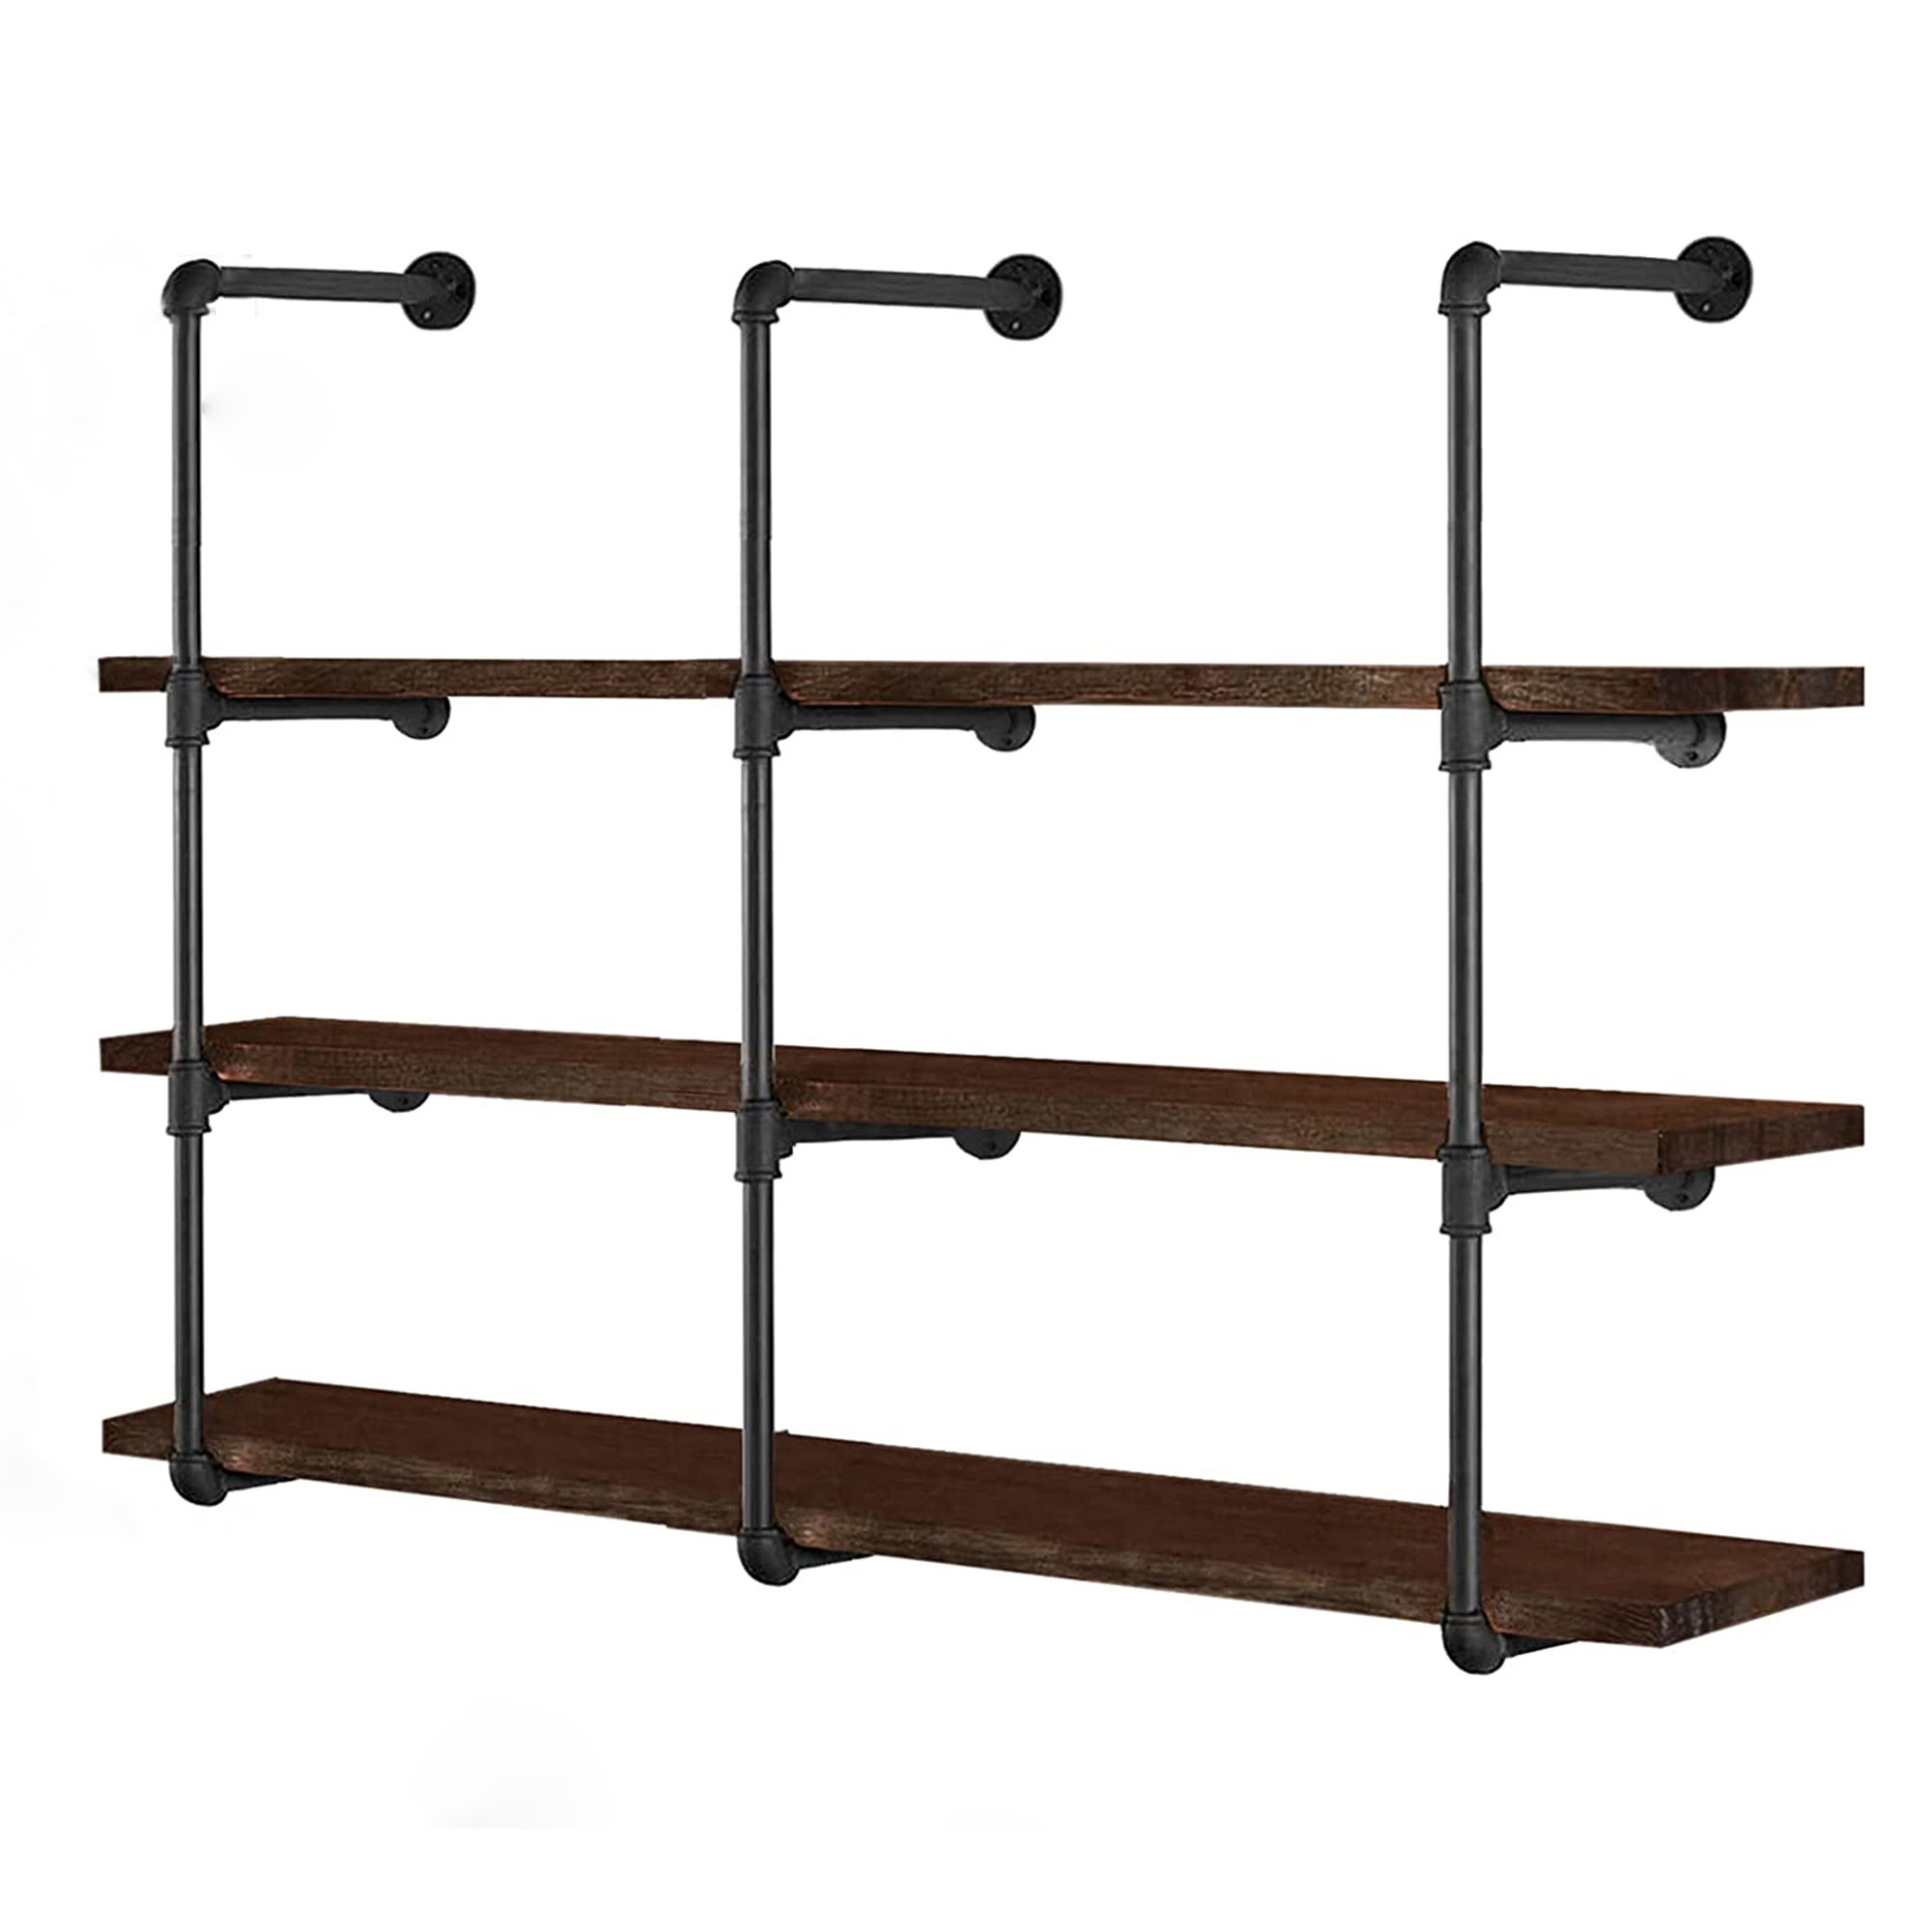 Iron 3-Tiered Pipe Flanges Wayfair Black Included) Friedeborn & D.I.Y Shelf Williston | & Forge Reviews Not Metal Planks (Wood Style